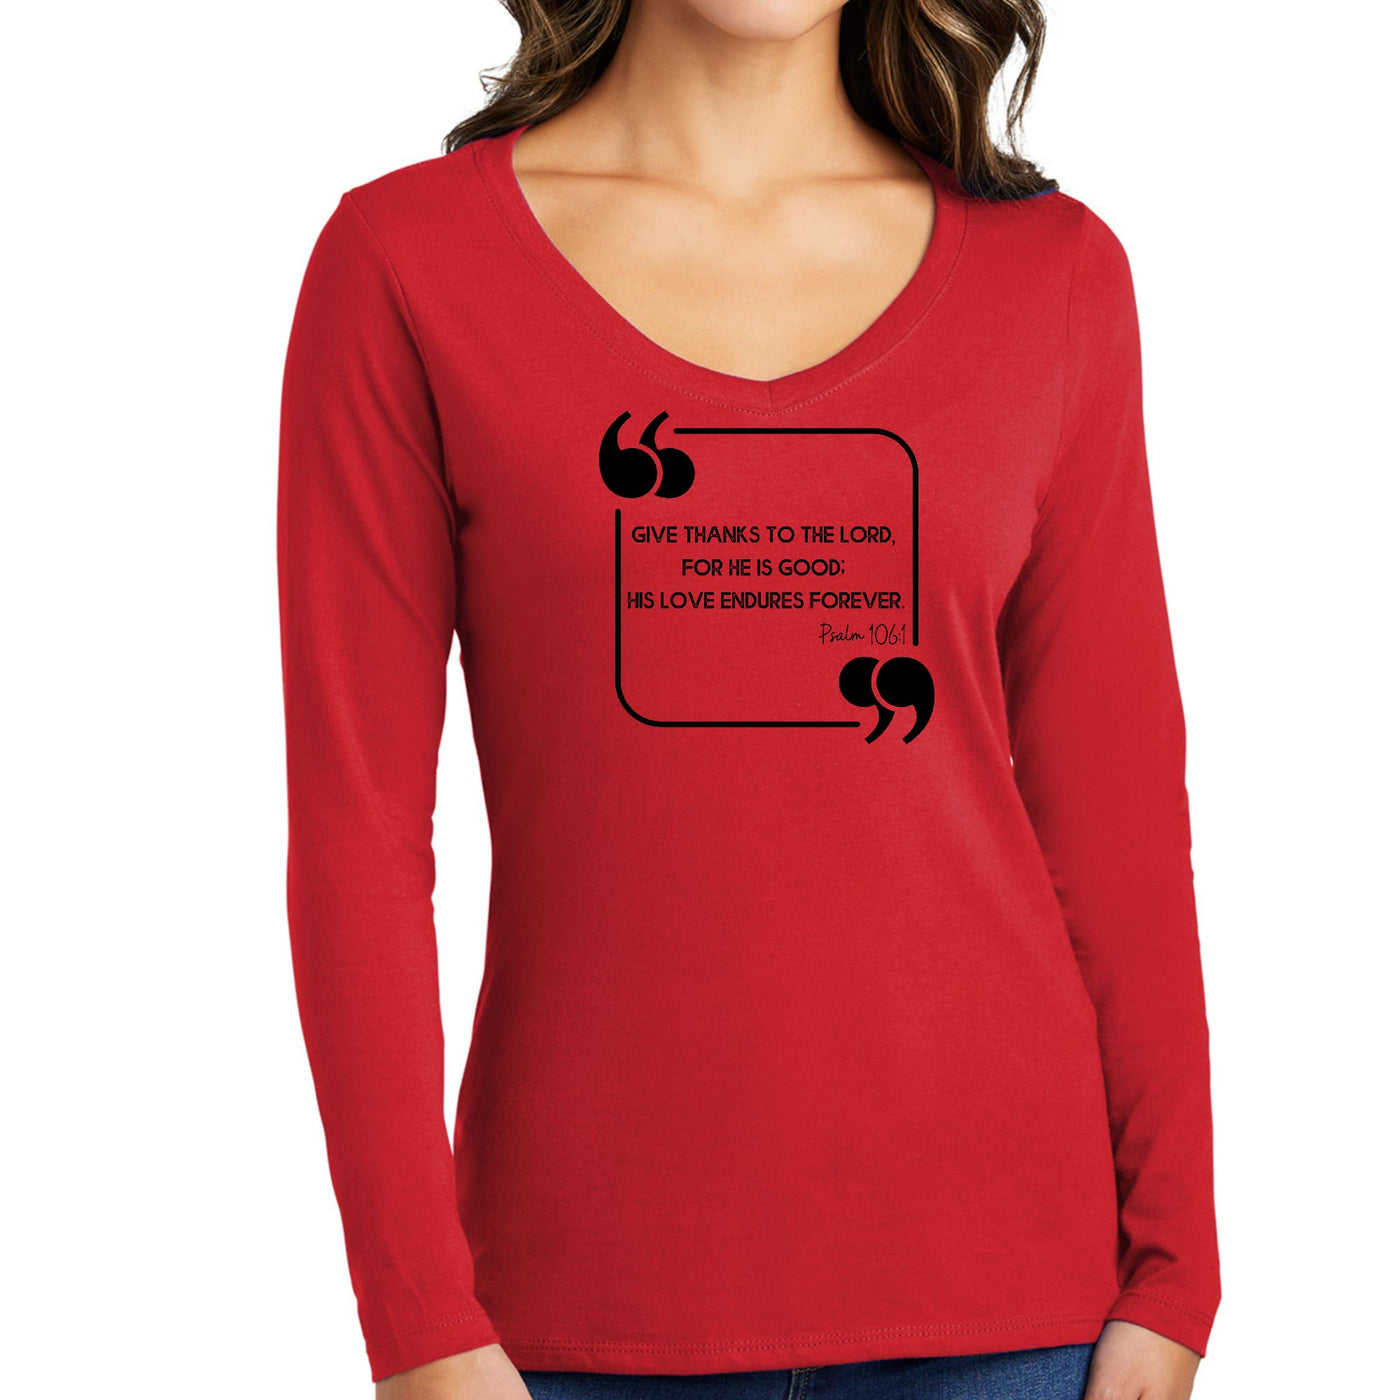 Womens Long Sleeve V-neck Graphic T-shirt Give Thanks To The Lord - Womens